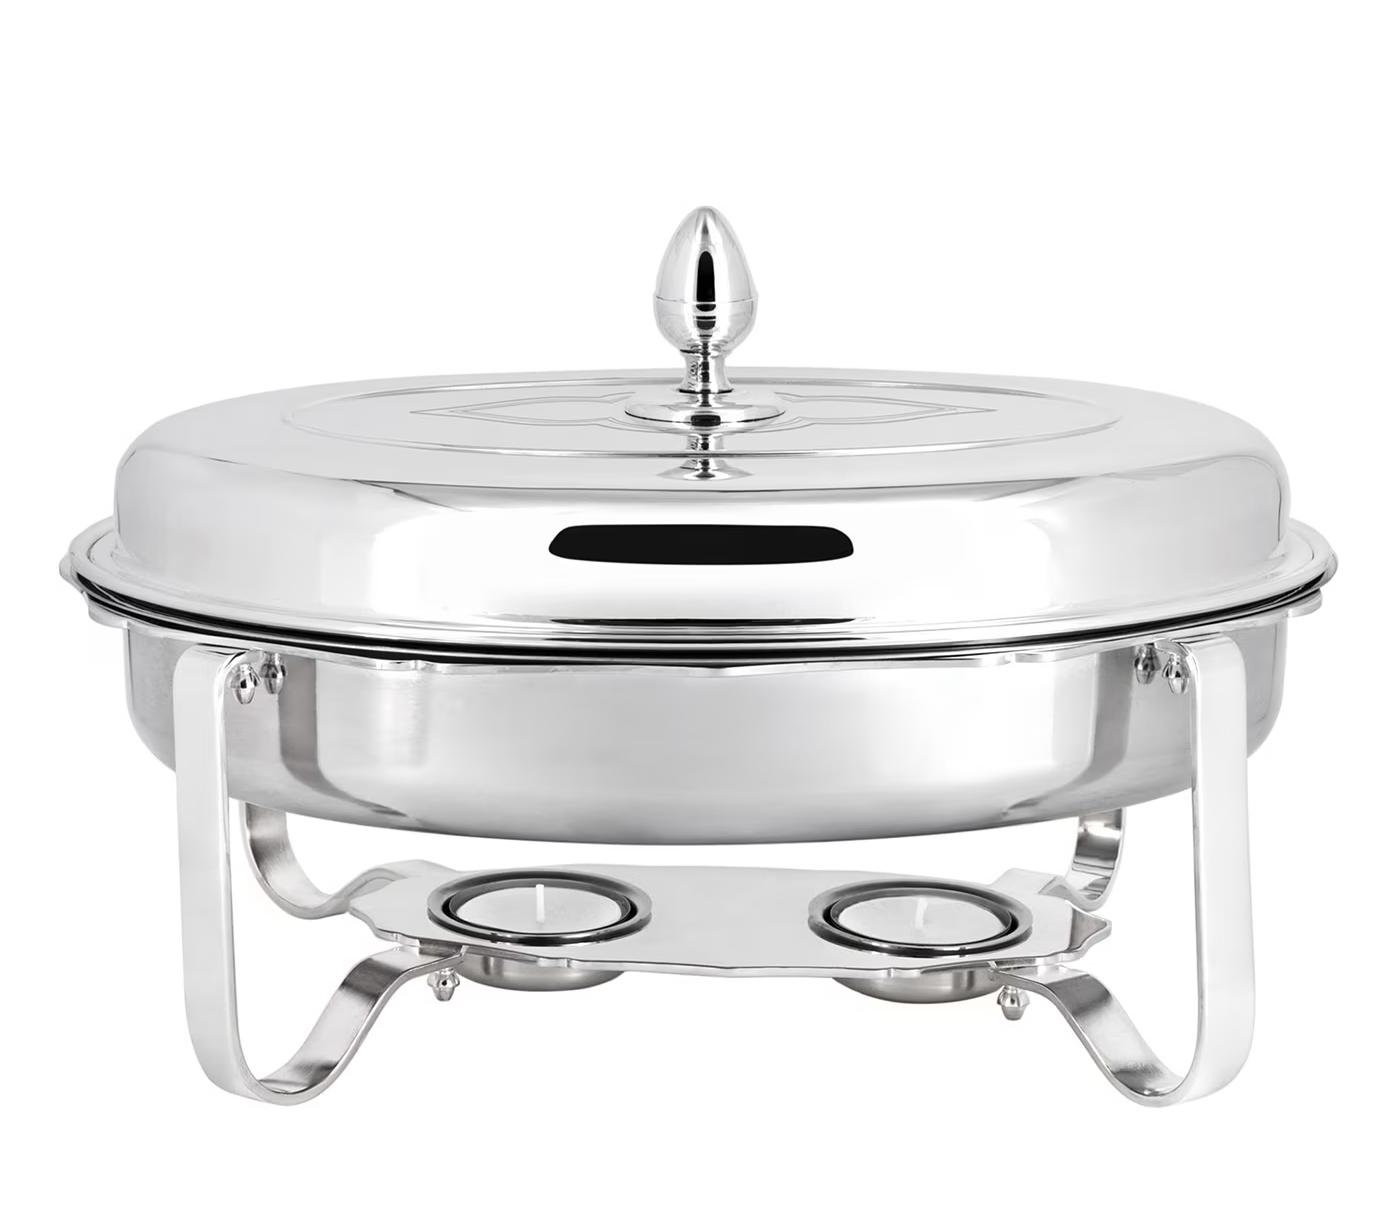 Oval Silver-Plated Chafing Dish